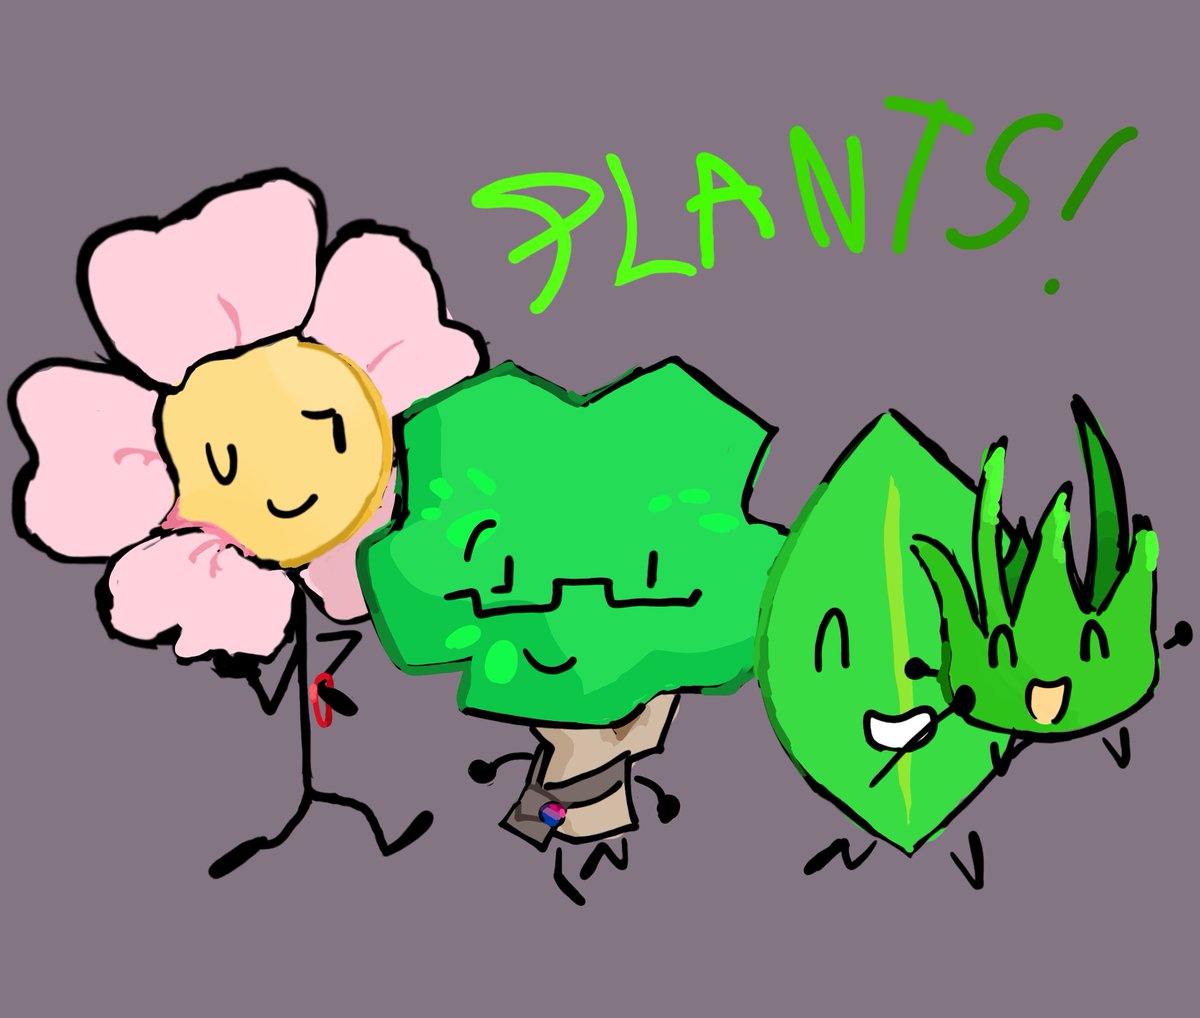 I'm so obsessed with this trio they are so adorable #bfdi #objectshow